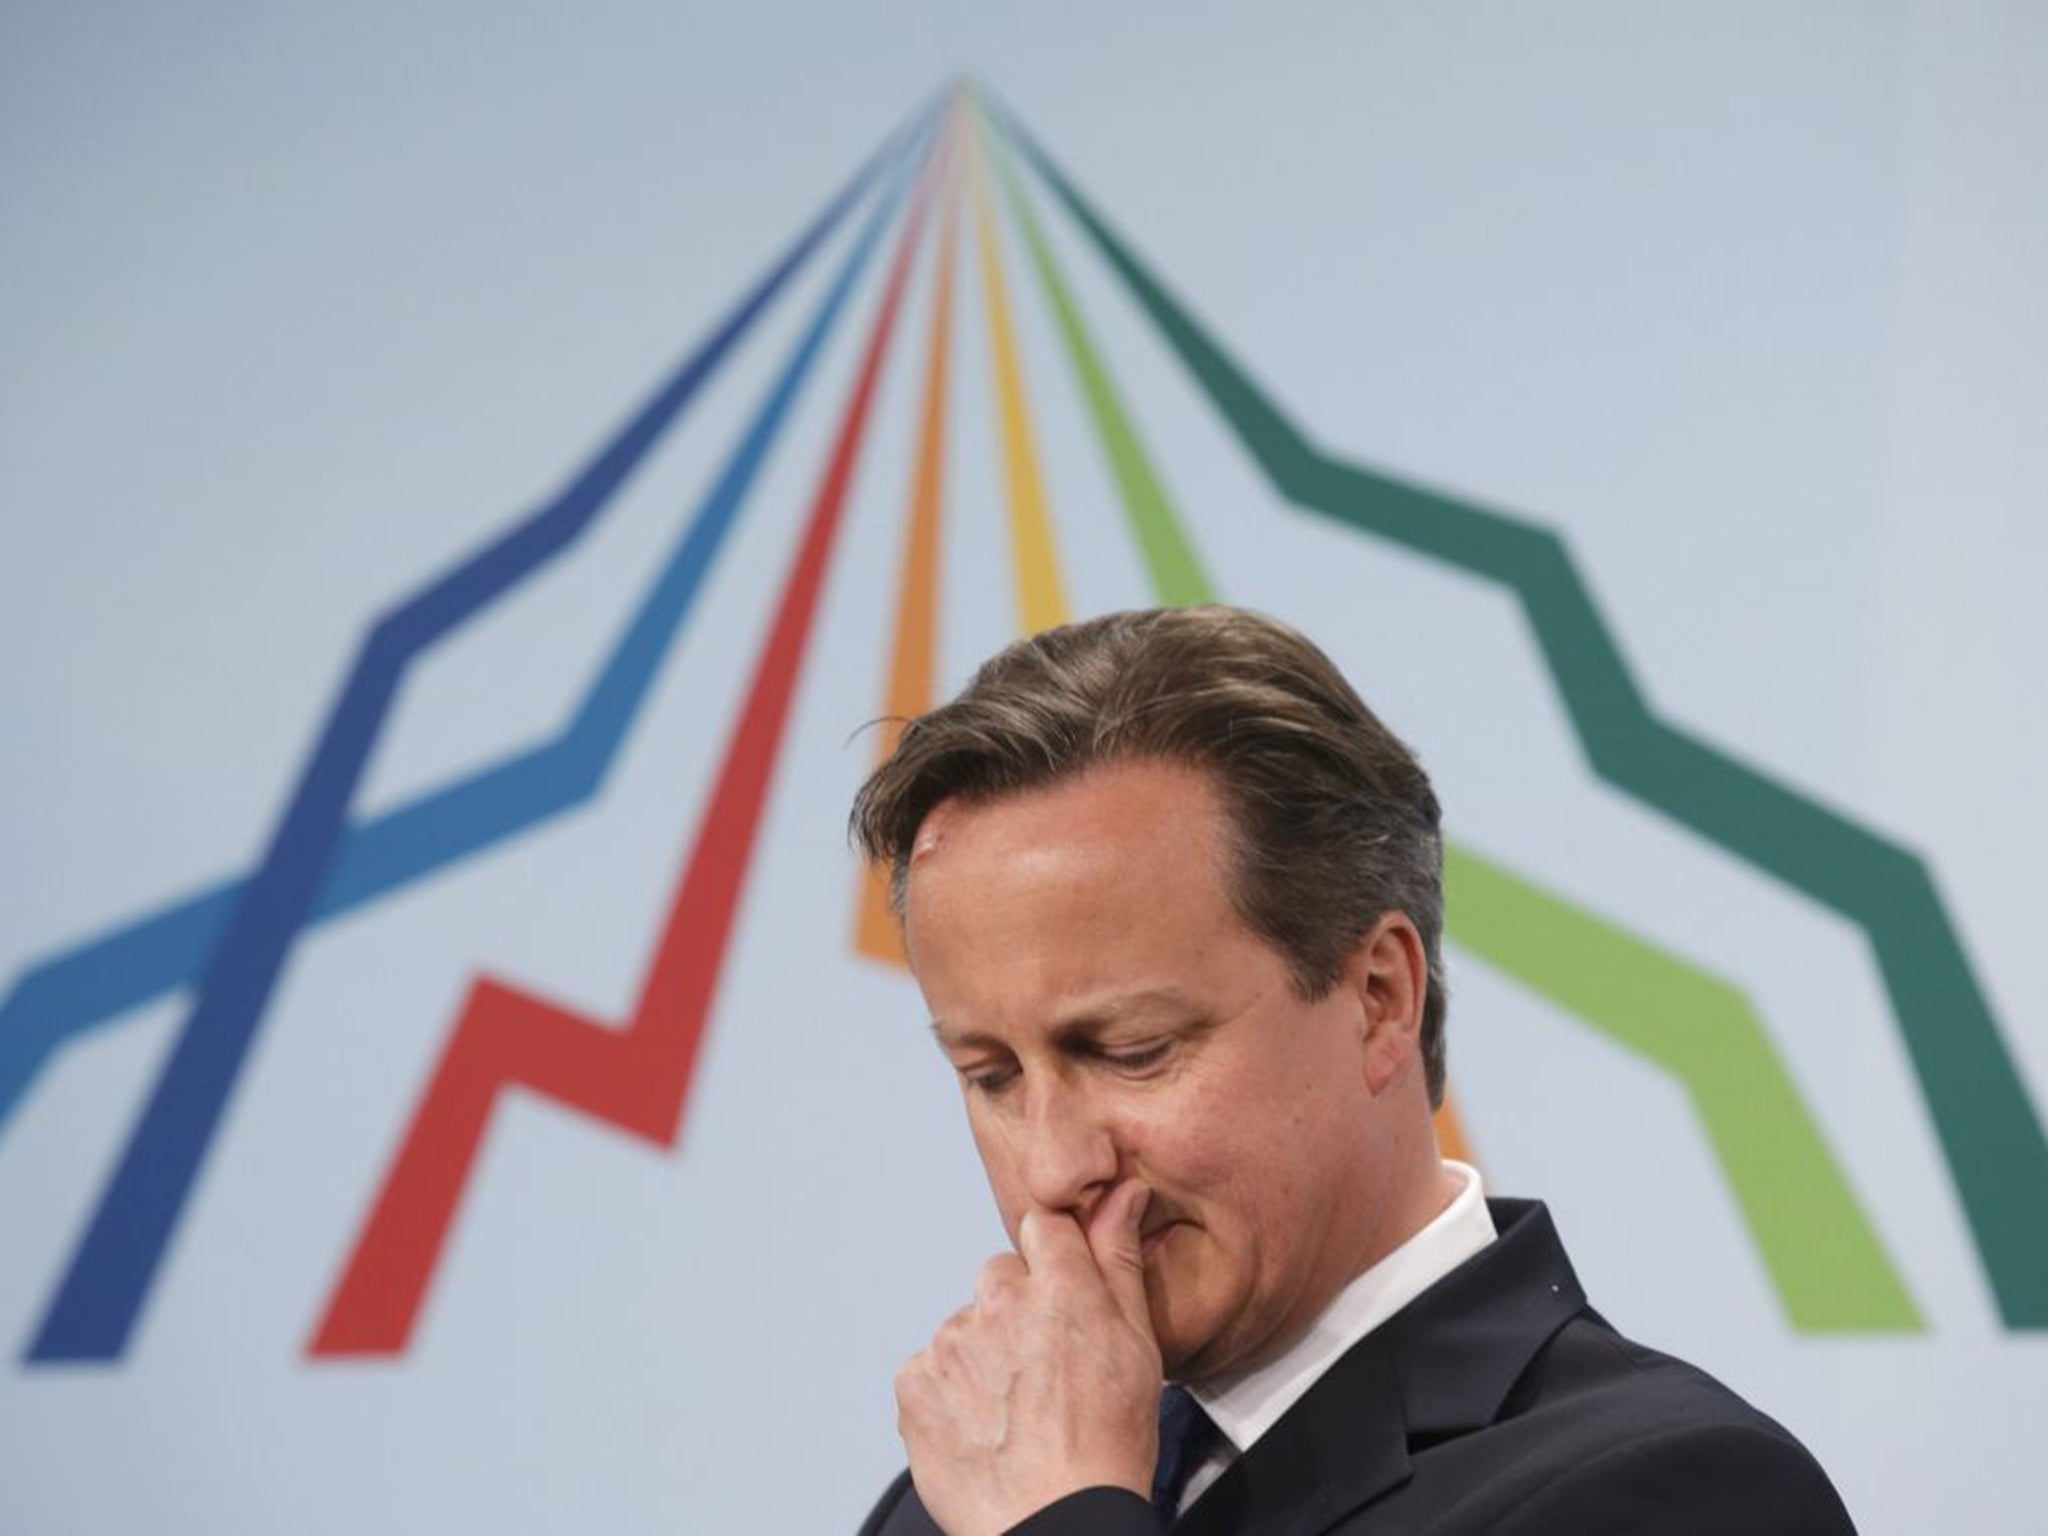 Prime Minister David Cameron says his party must not ‘remain neutral’ in the EU membership referendum (Reuters)